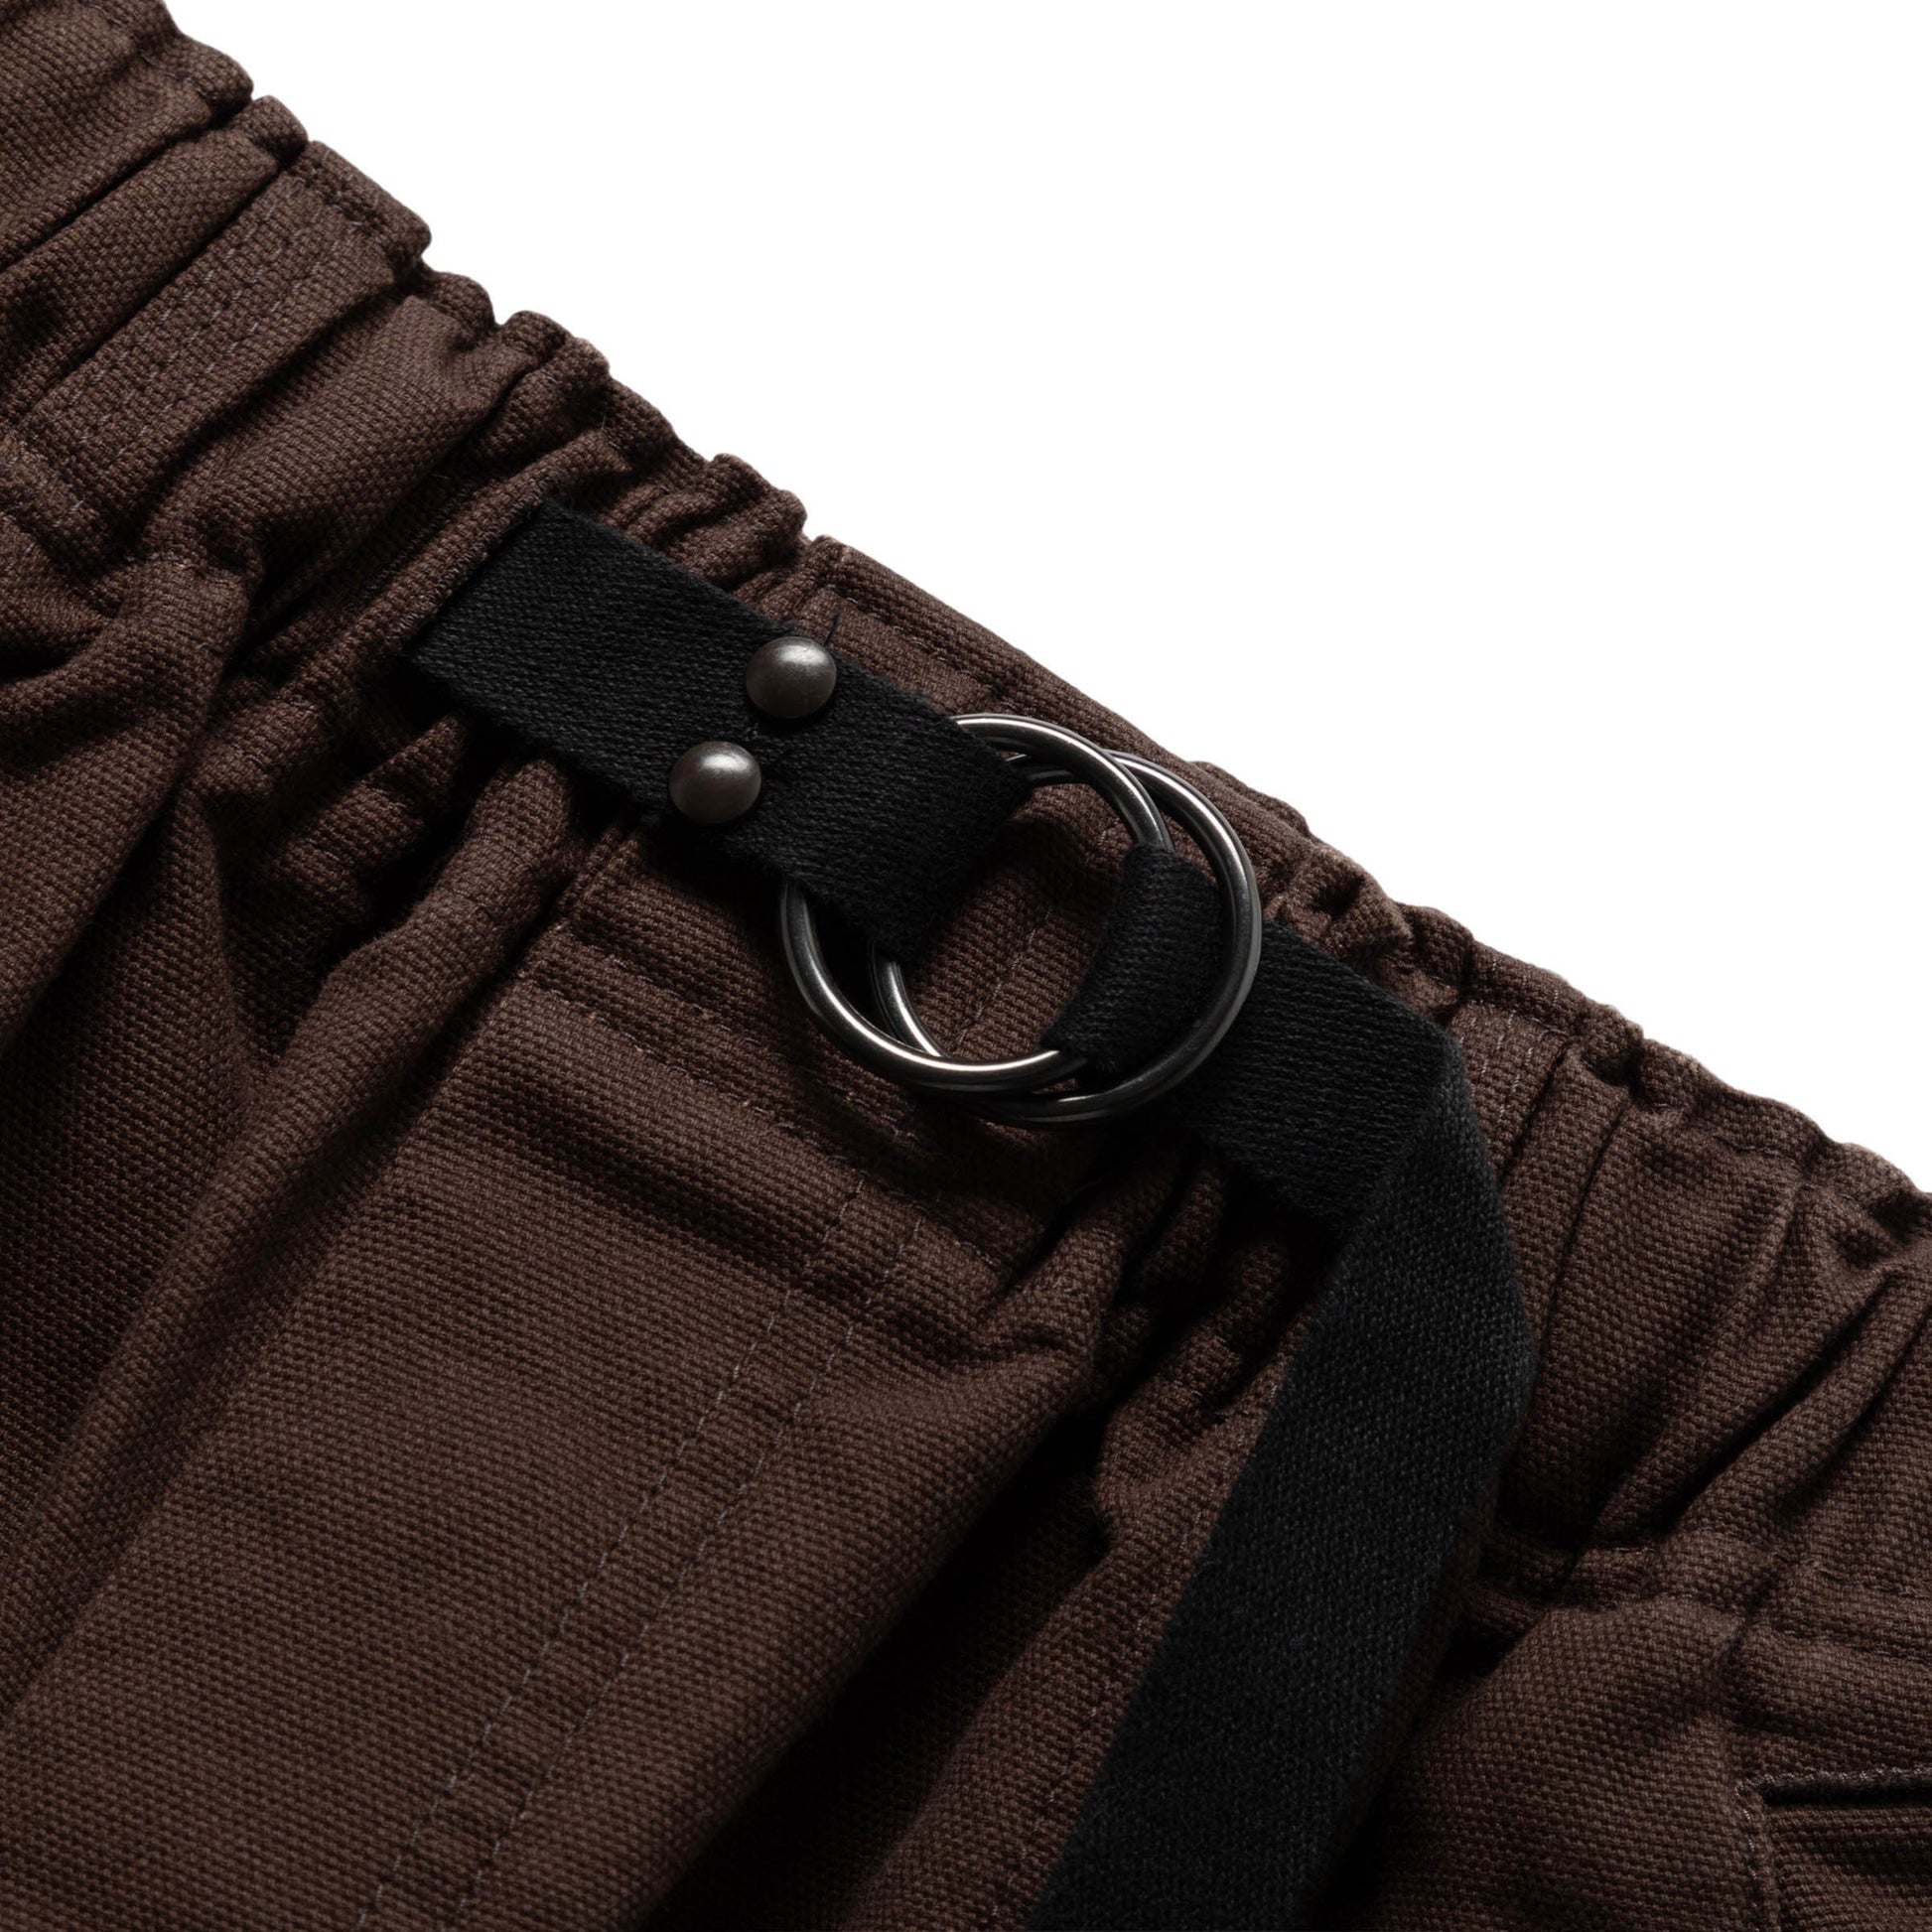 South2 West8 Pants BELTED C.S. PANT